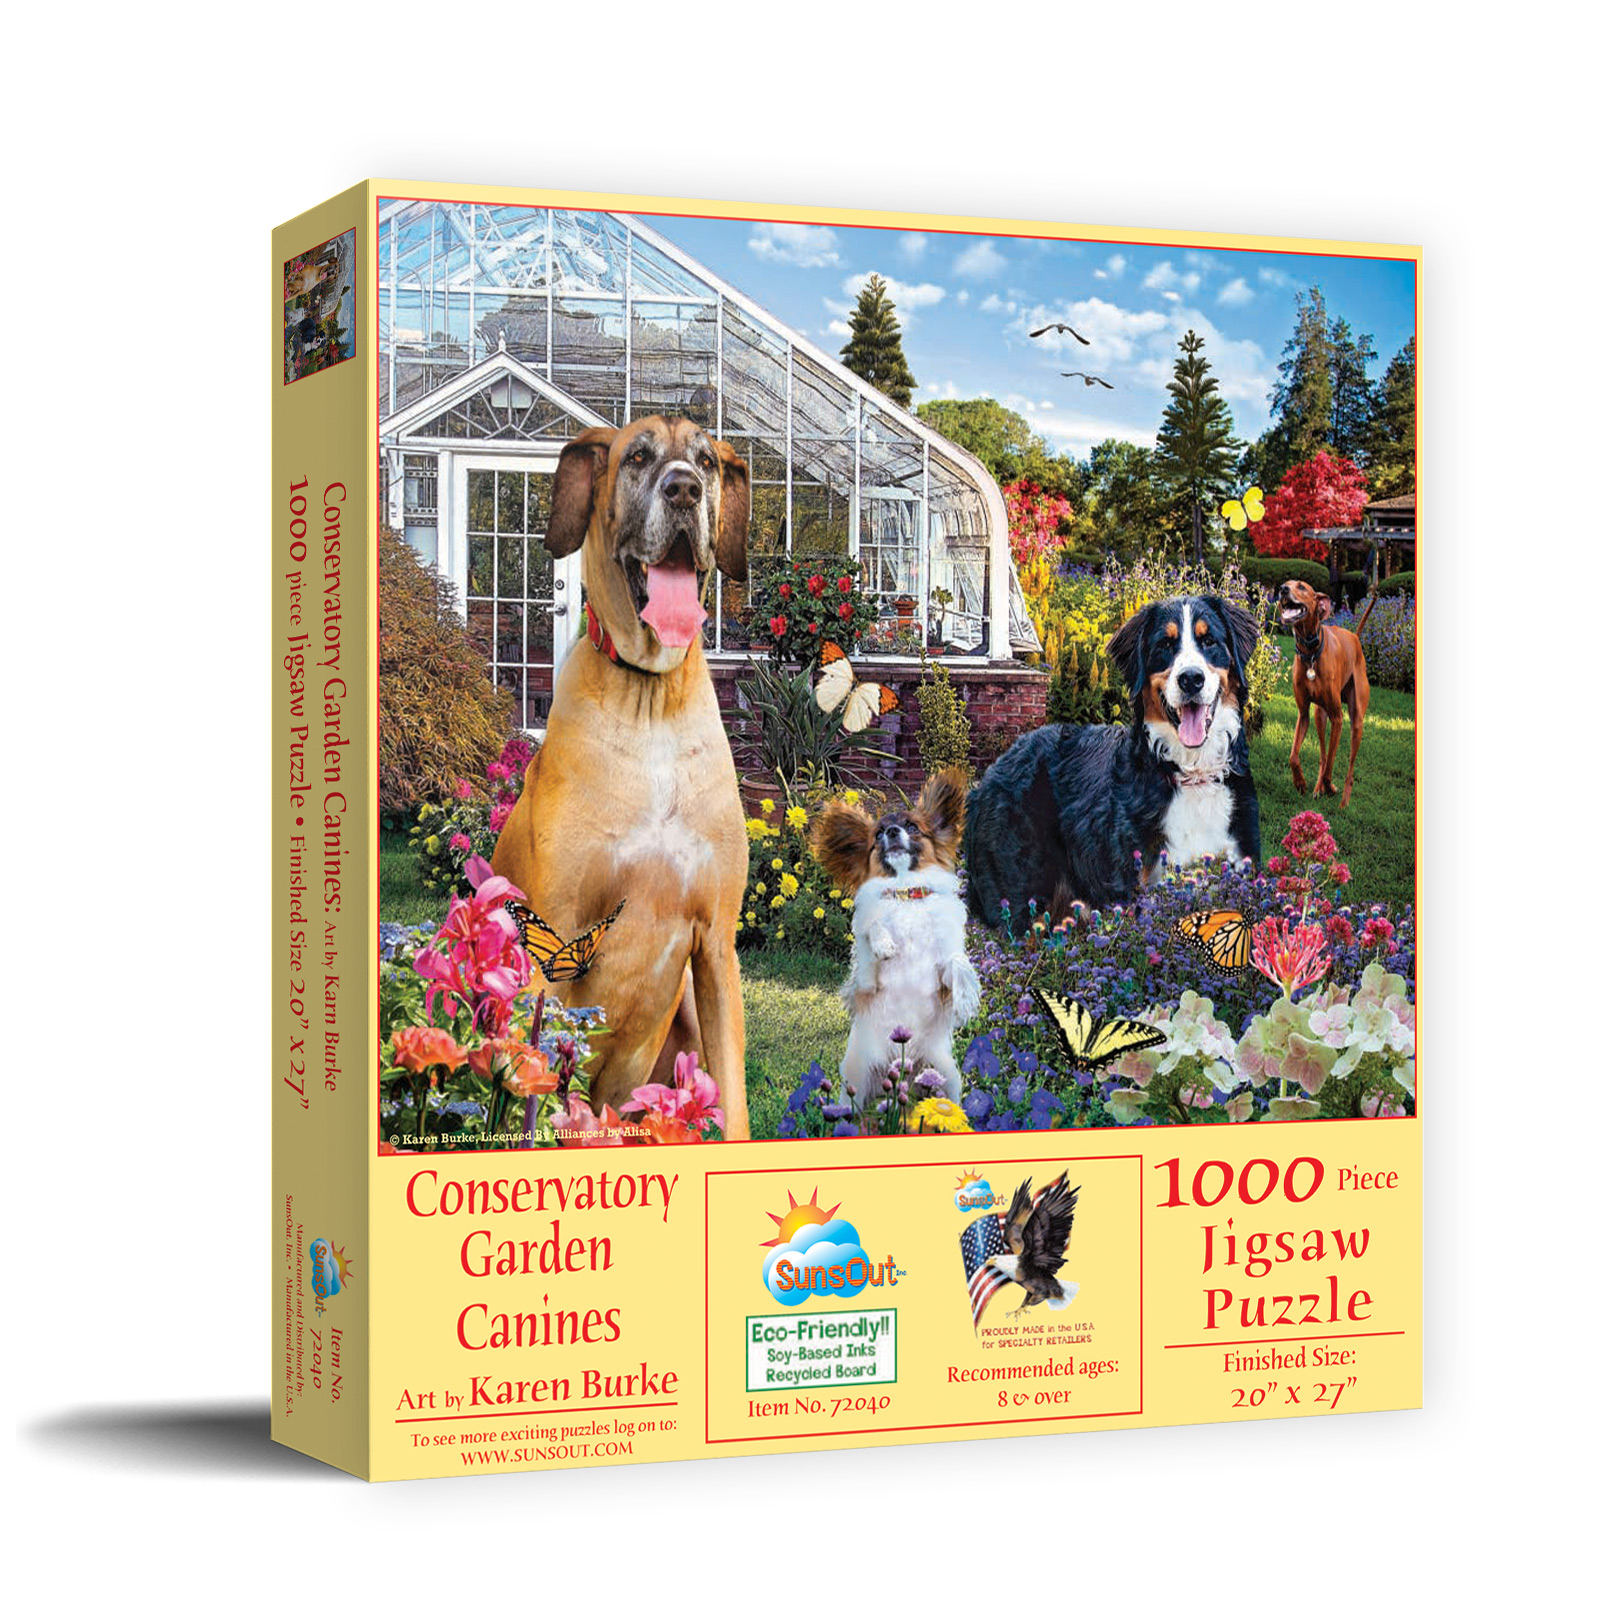 Conservatory Garden Canines